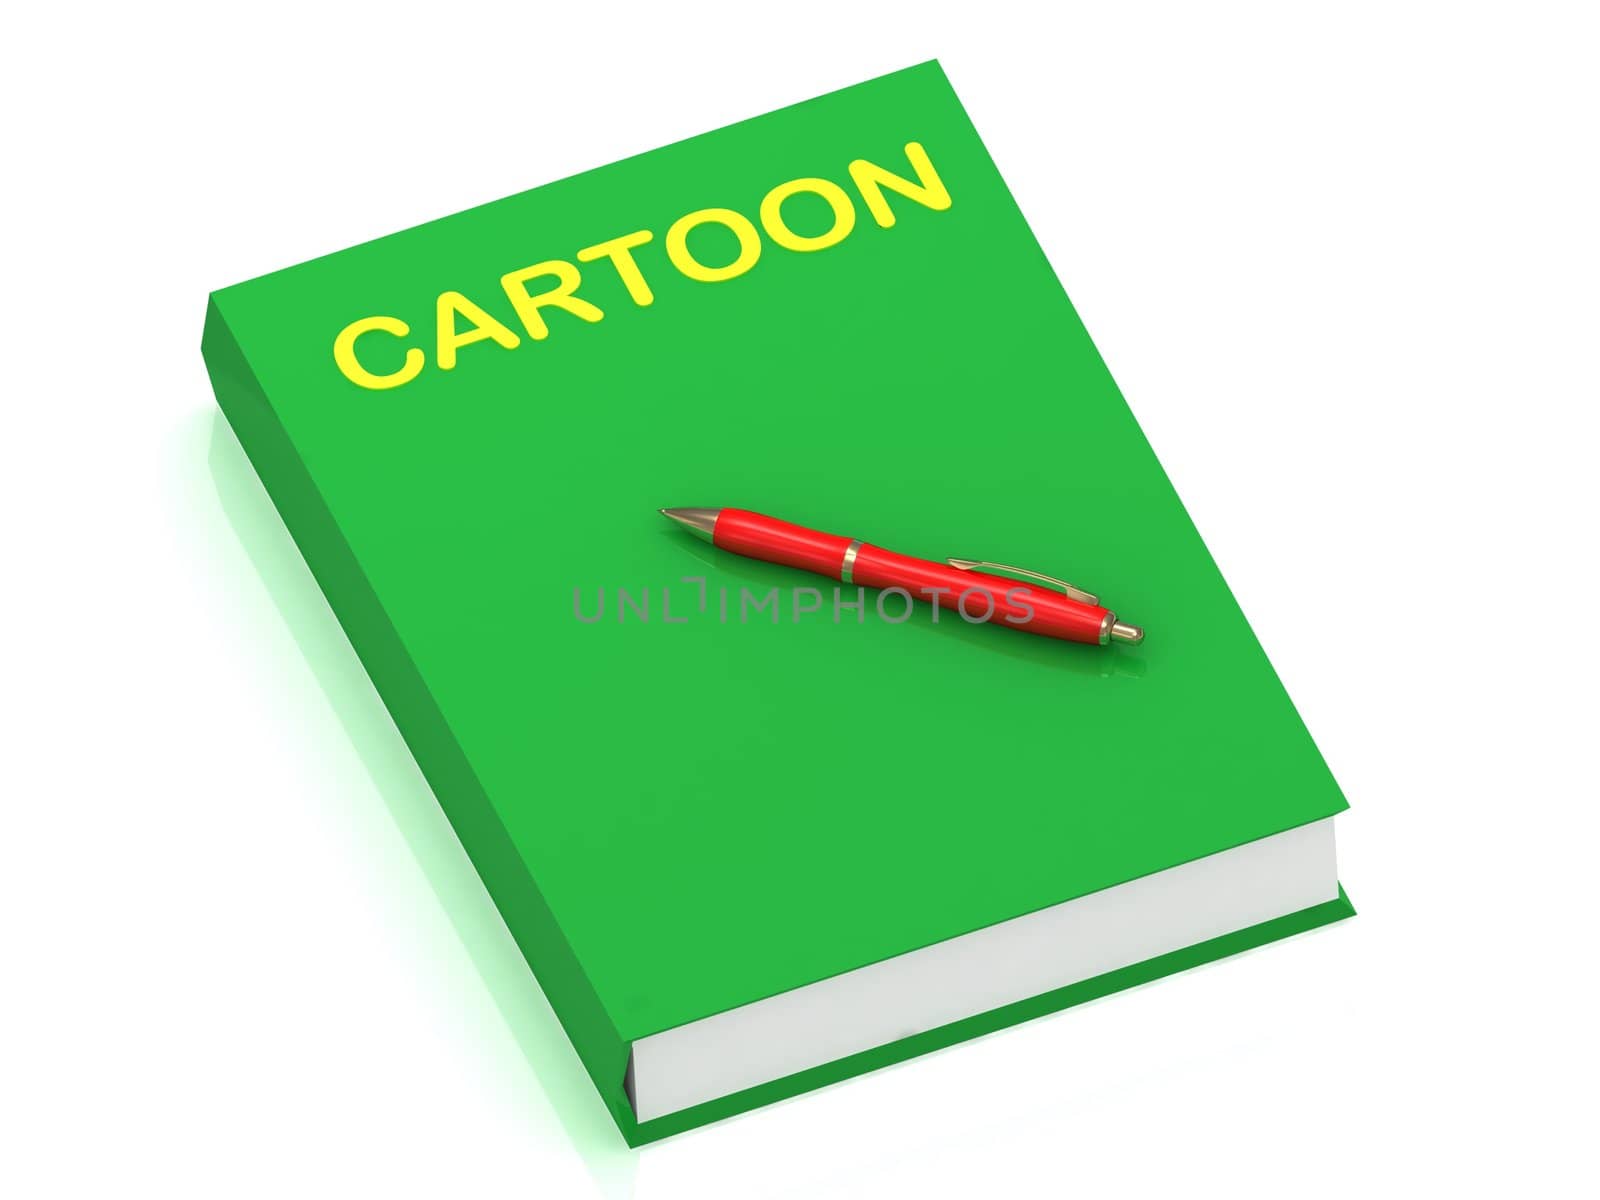 CARTOON name on cover book by GreenMost